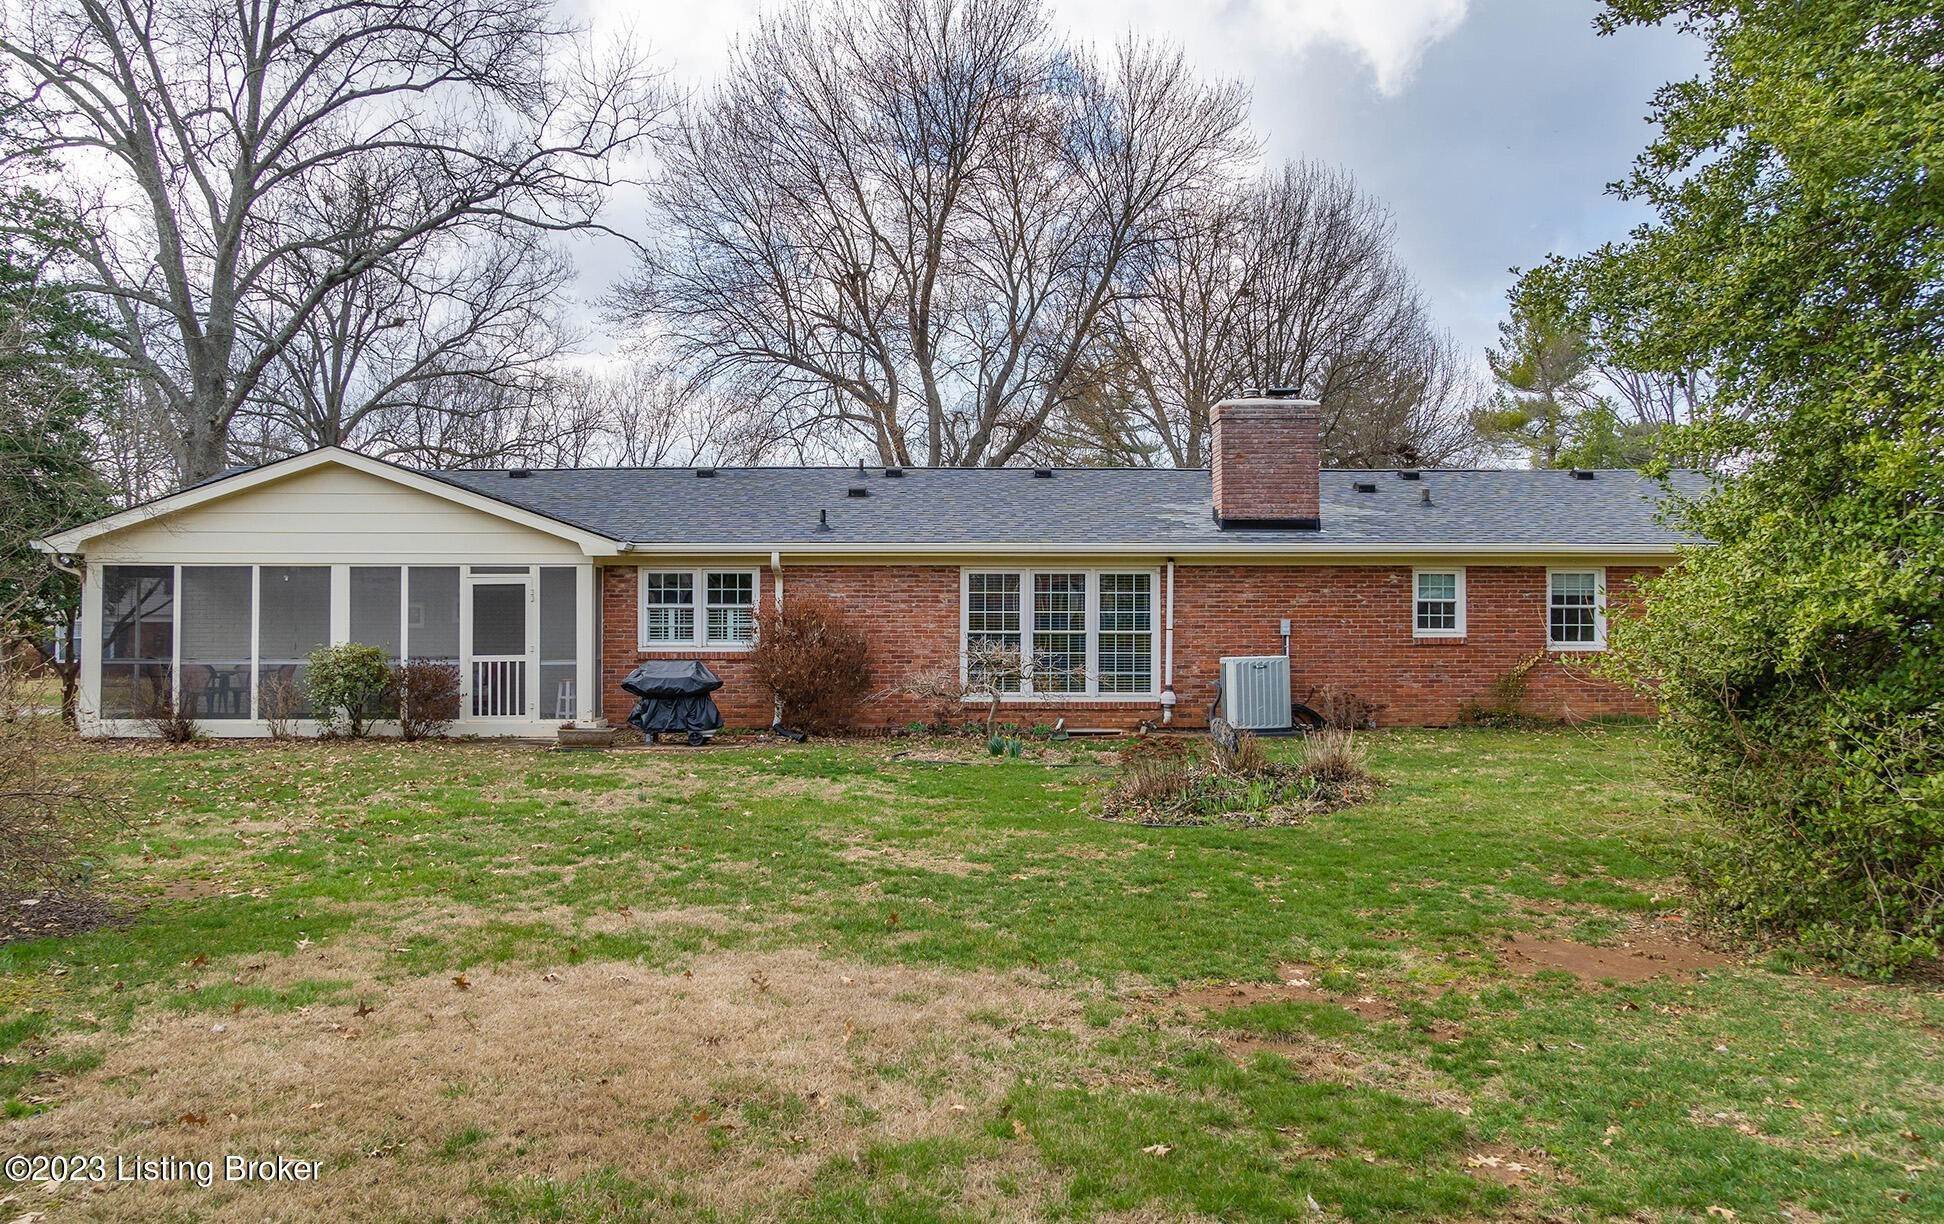 40. Single Family at Louisville, KY 40222